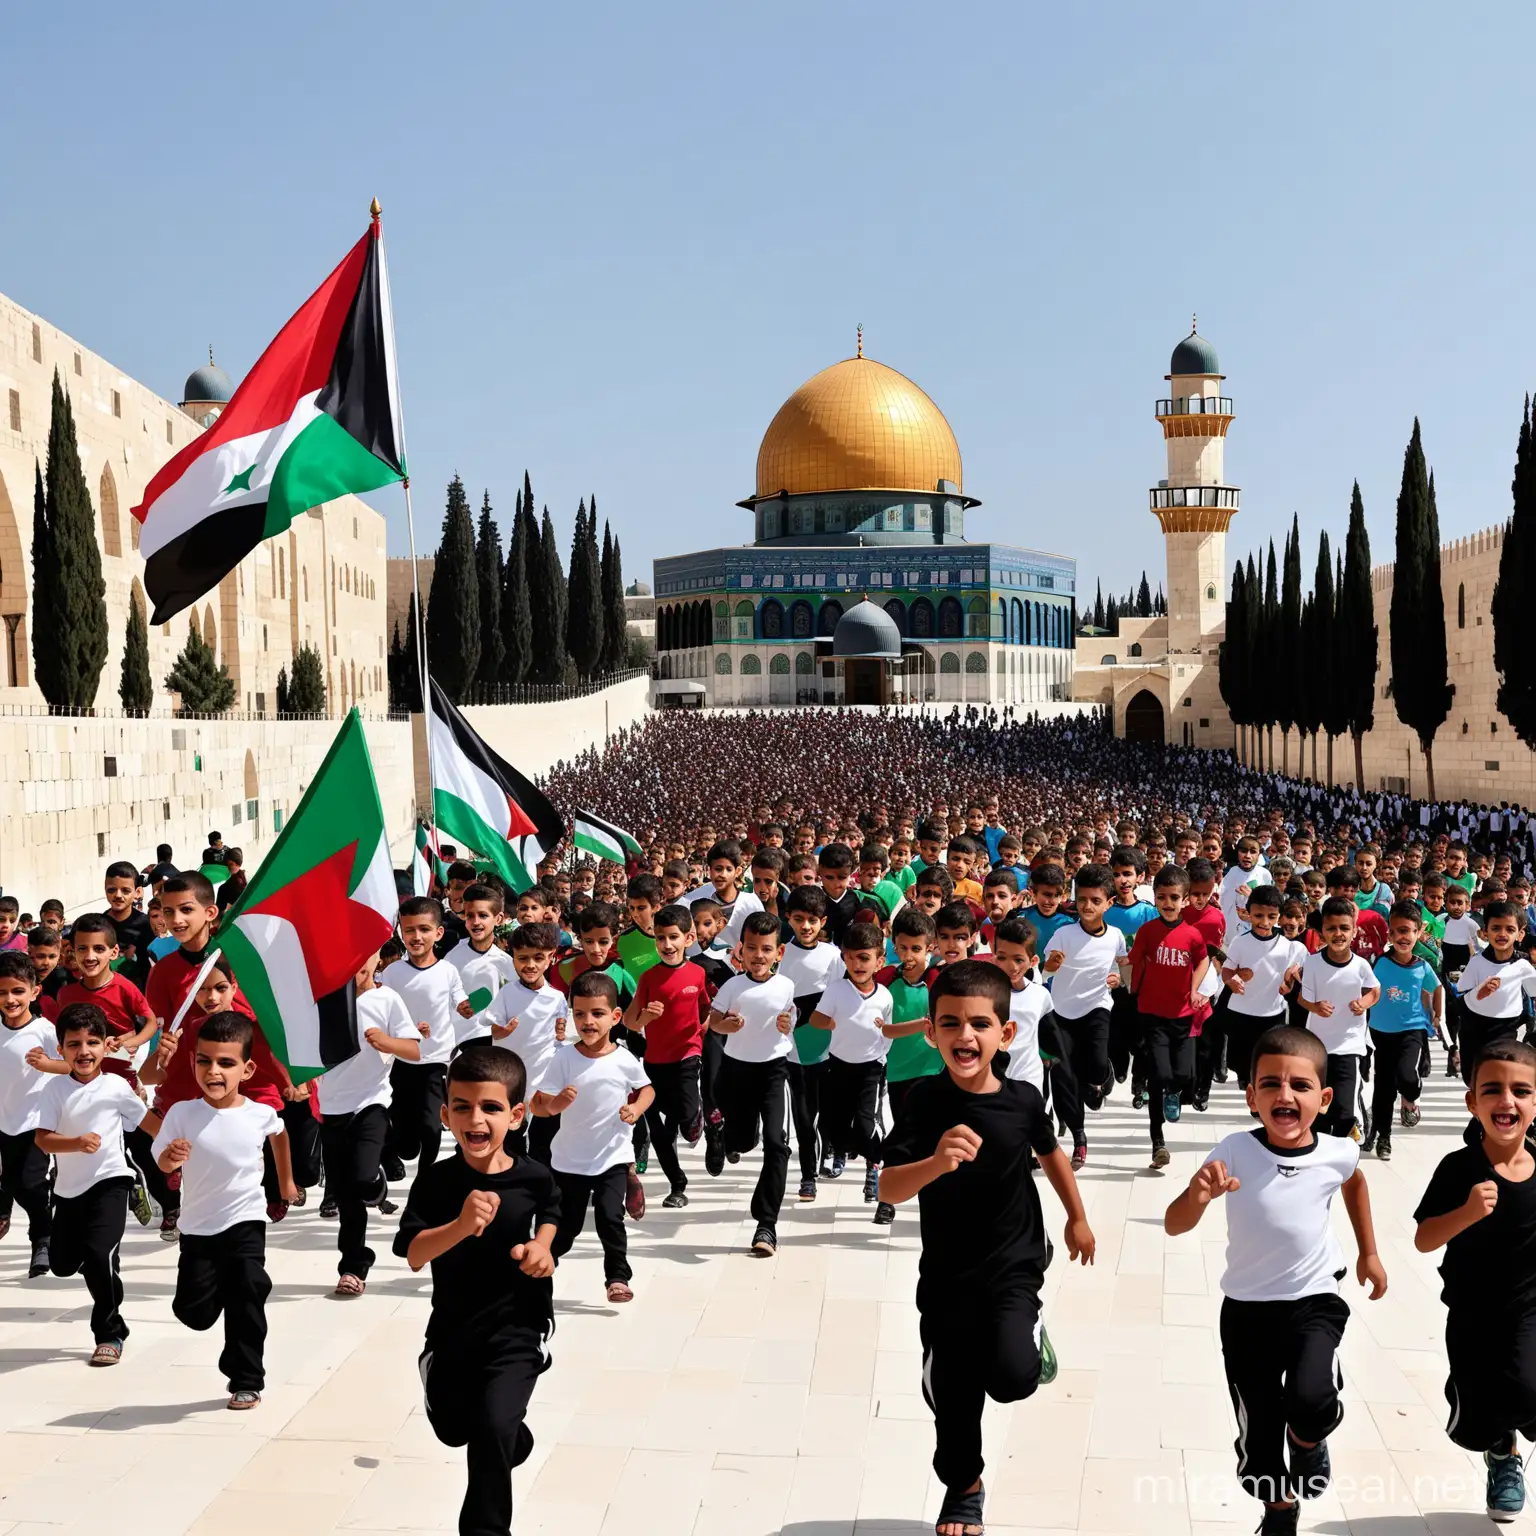 Many children of Gaza are running toward the Al-Aqsa Mosque with anger and happiness raising many the flag of Palestine.